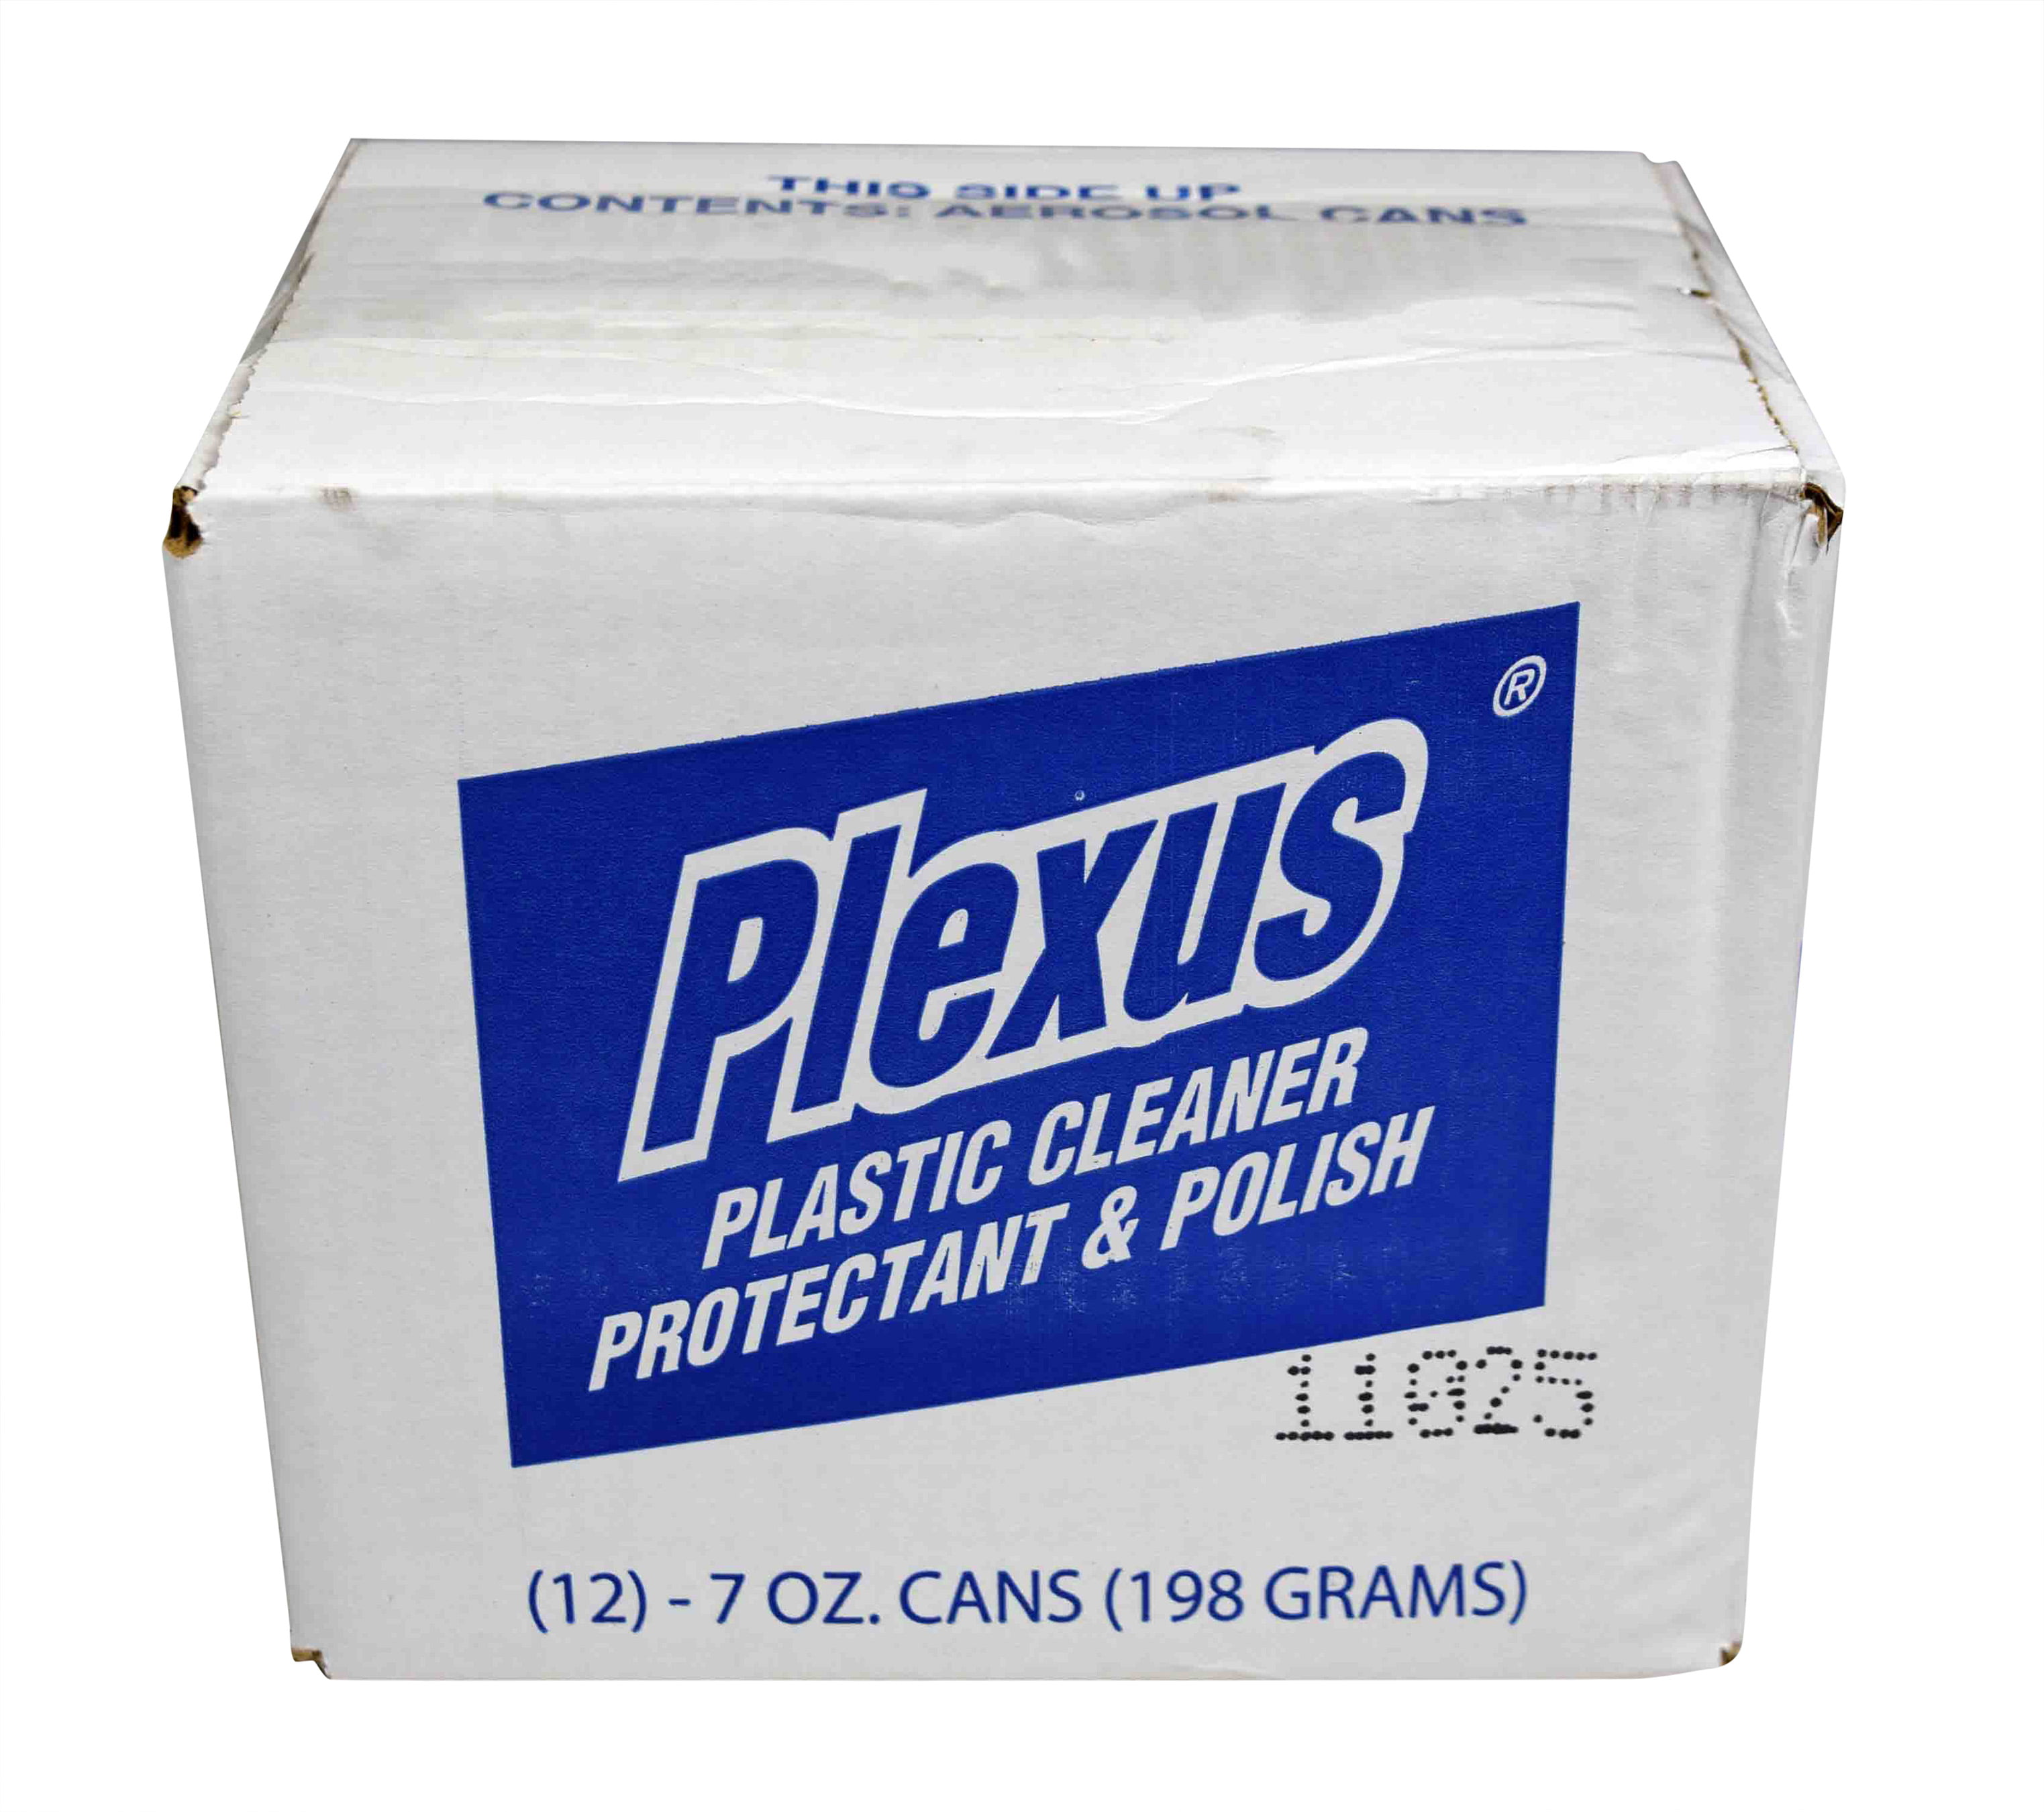 Plexus Plastic Cleaner Protectant & Polish 7oz Can 12 Pack MADE In the USA  